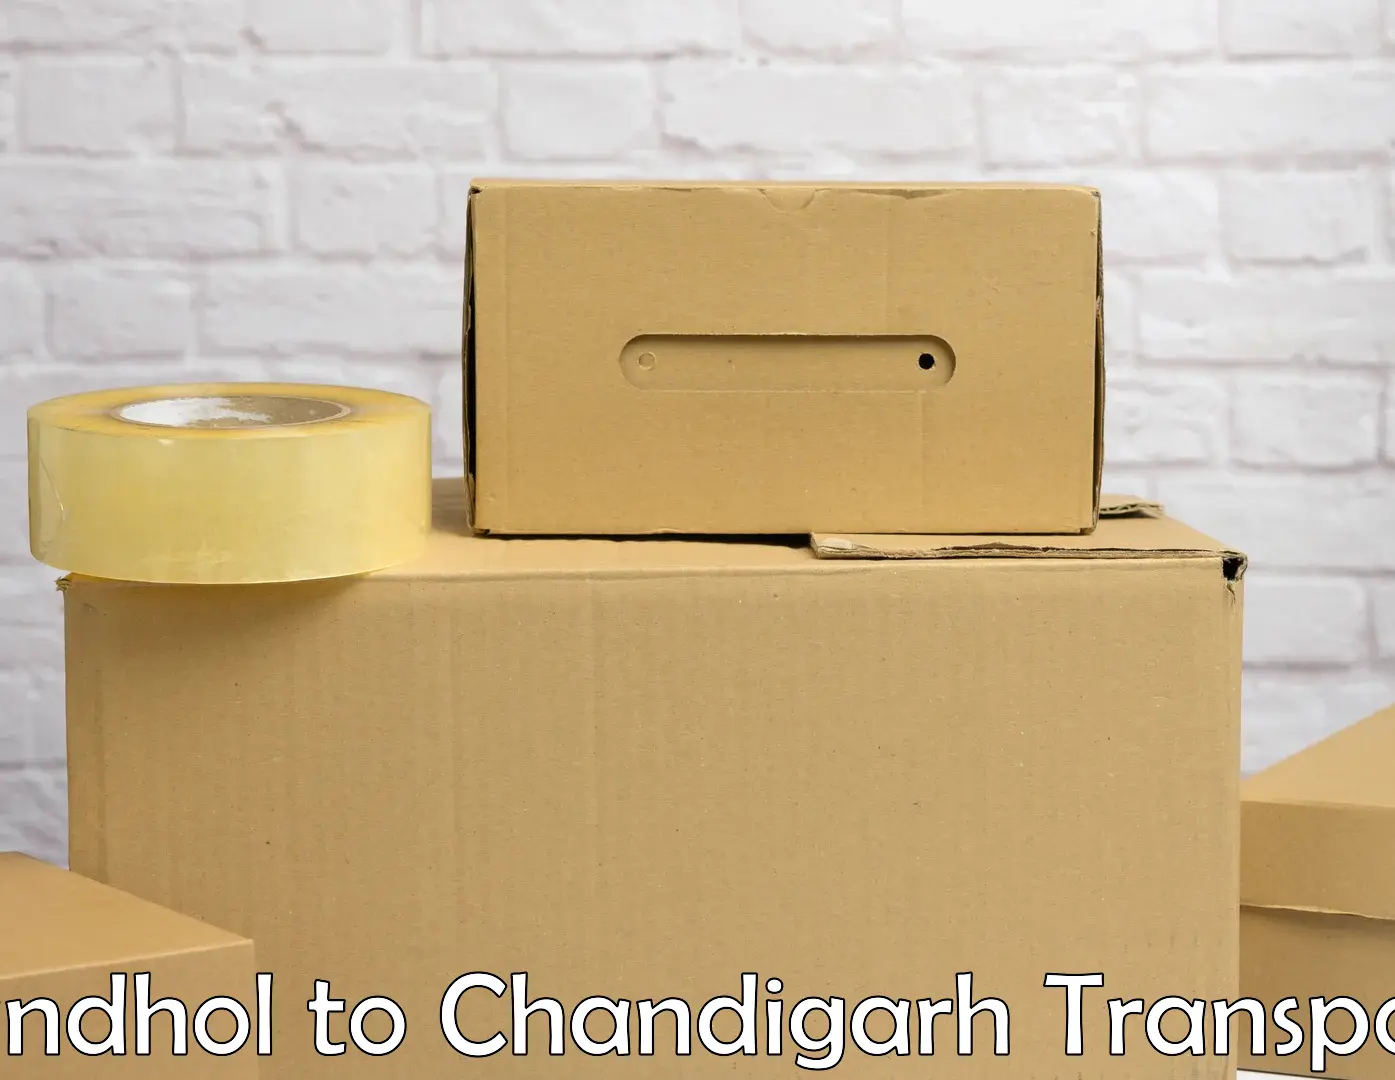 Transport bike from one state to another Sandhol to Chandigarh